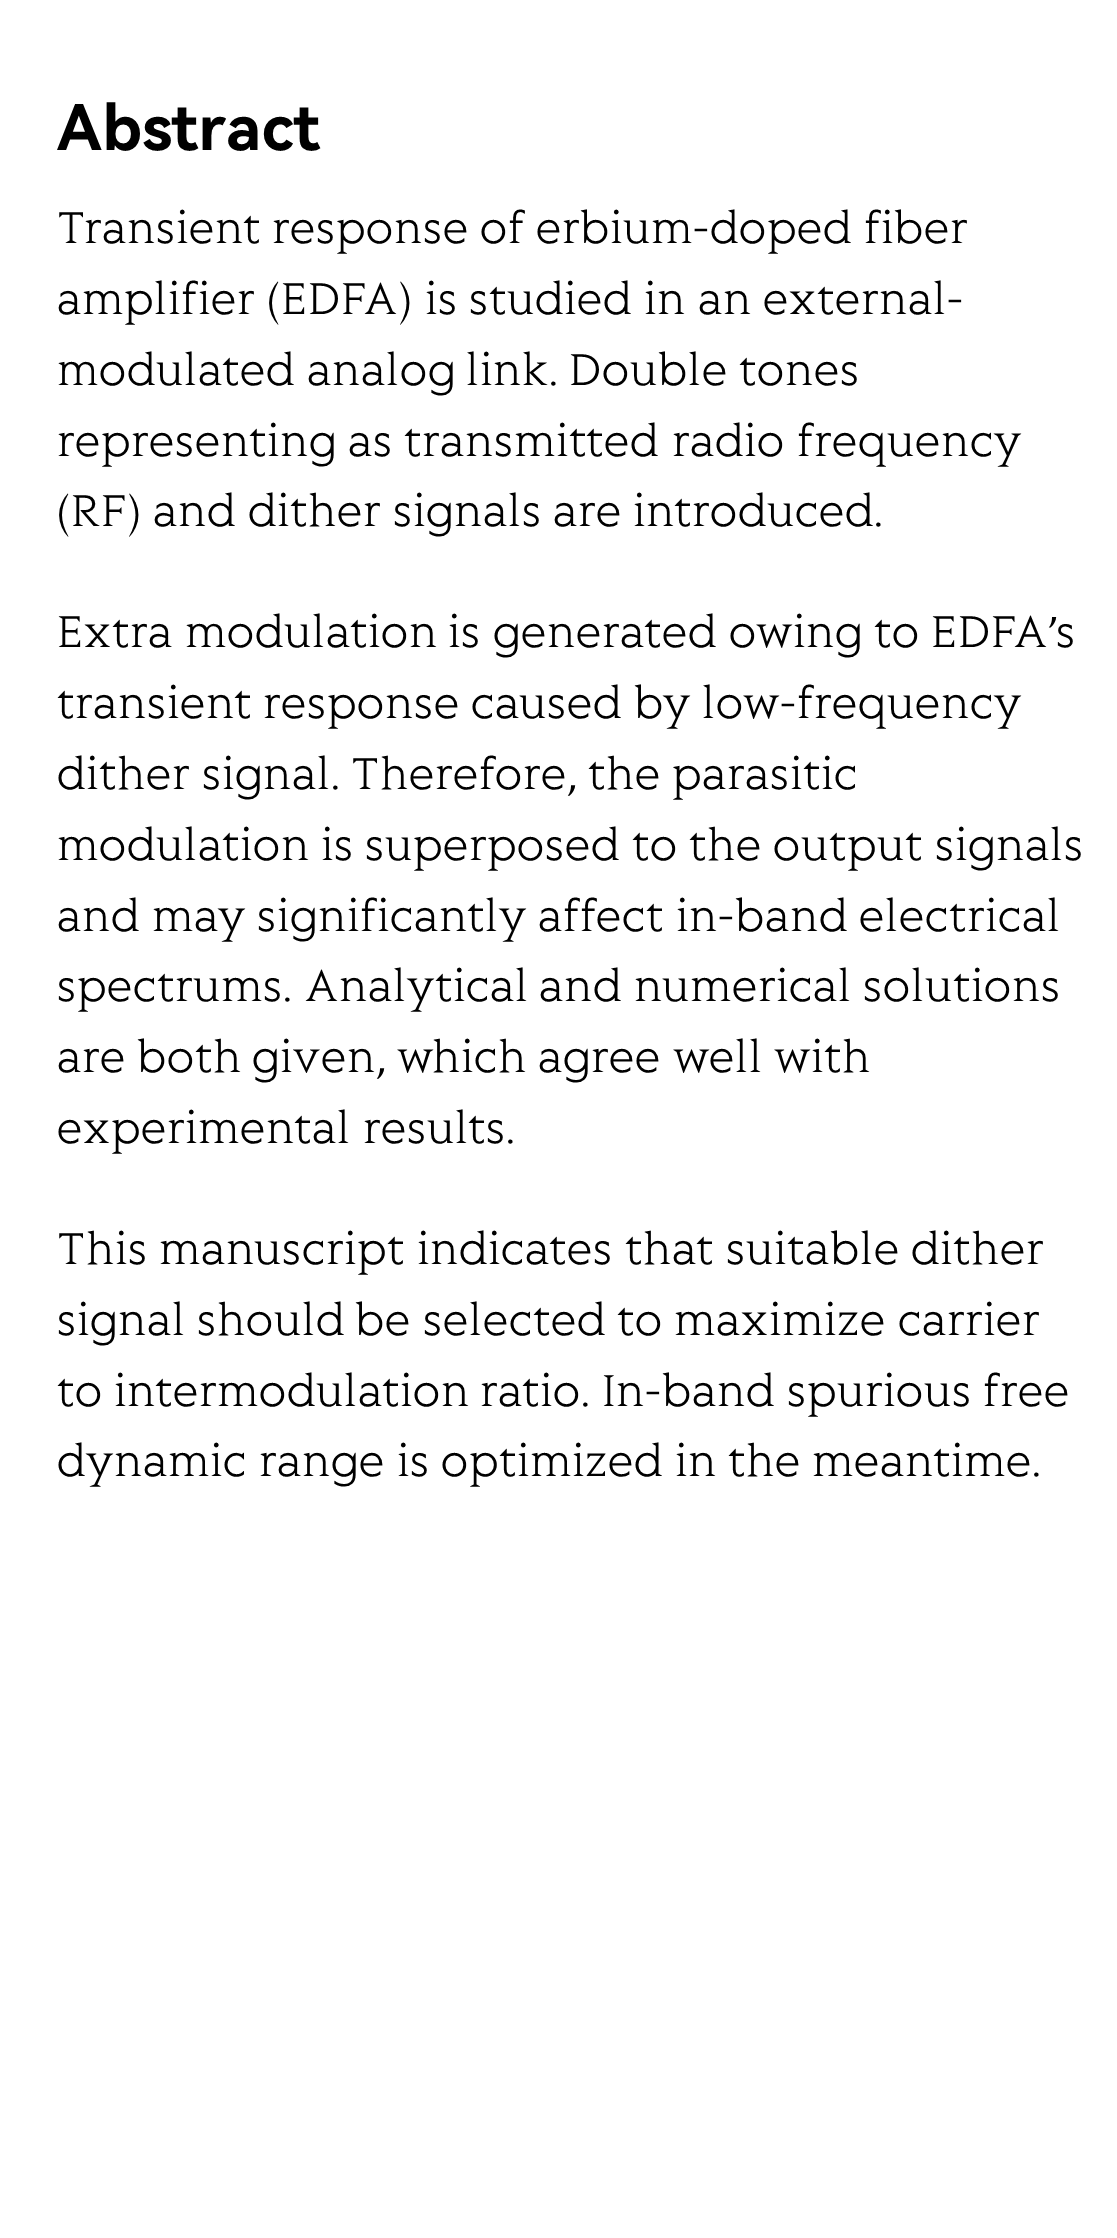 In-band intermodulation induced by transient response of erbium-doped fiber amplifier_2